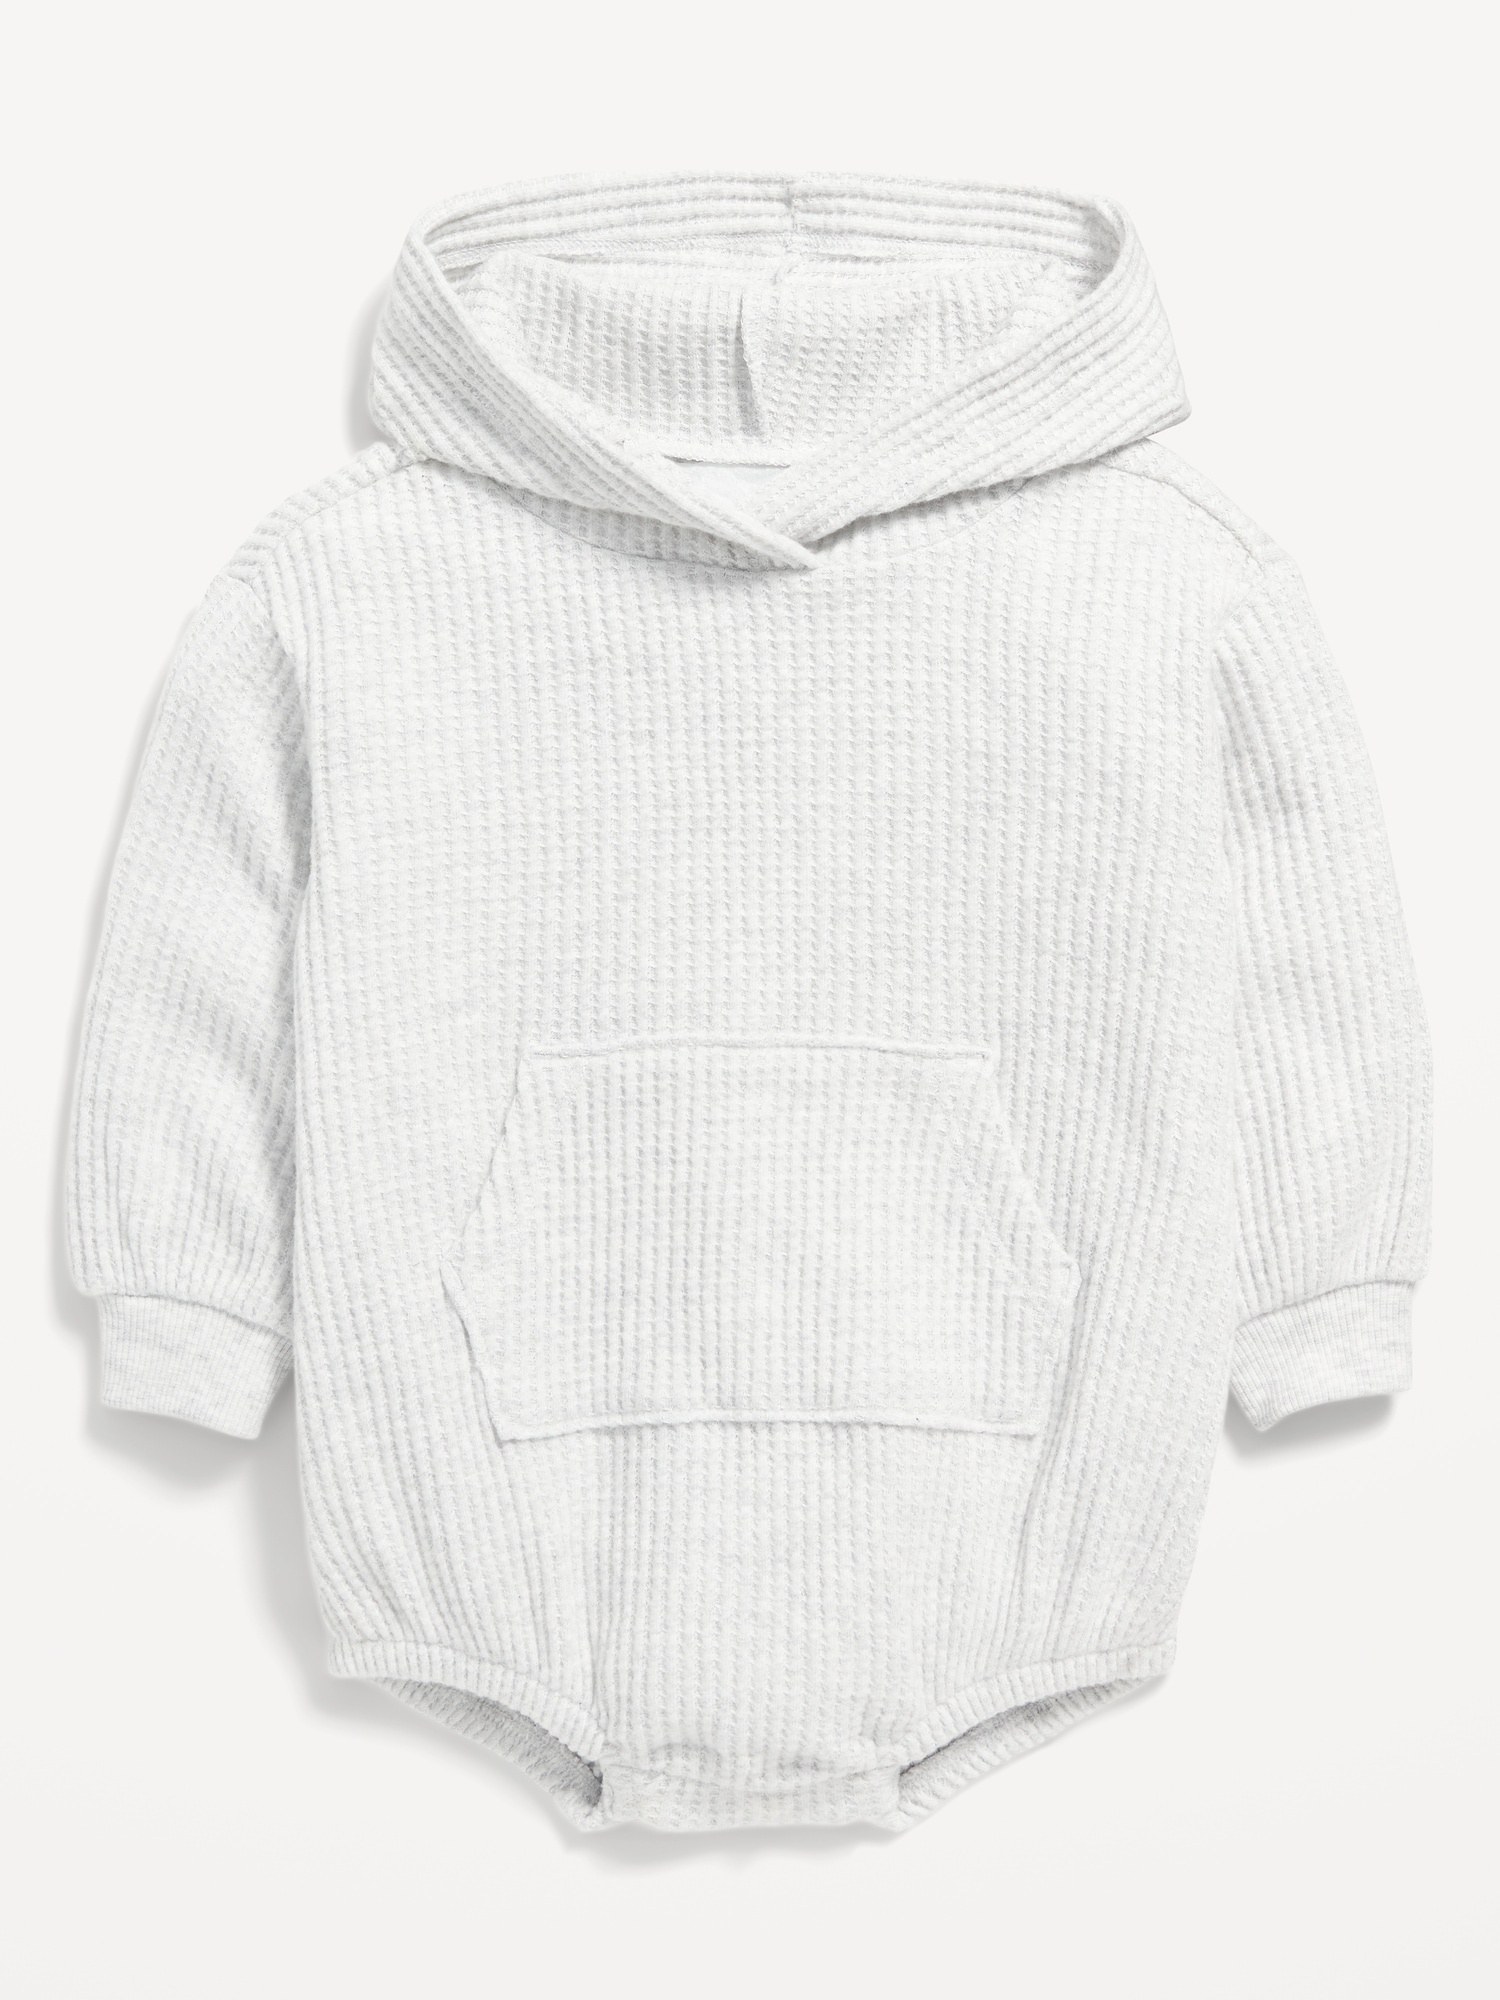 Unisex Thermal-Knit Hooded One-Piece Romper for Baby | Old Navy